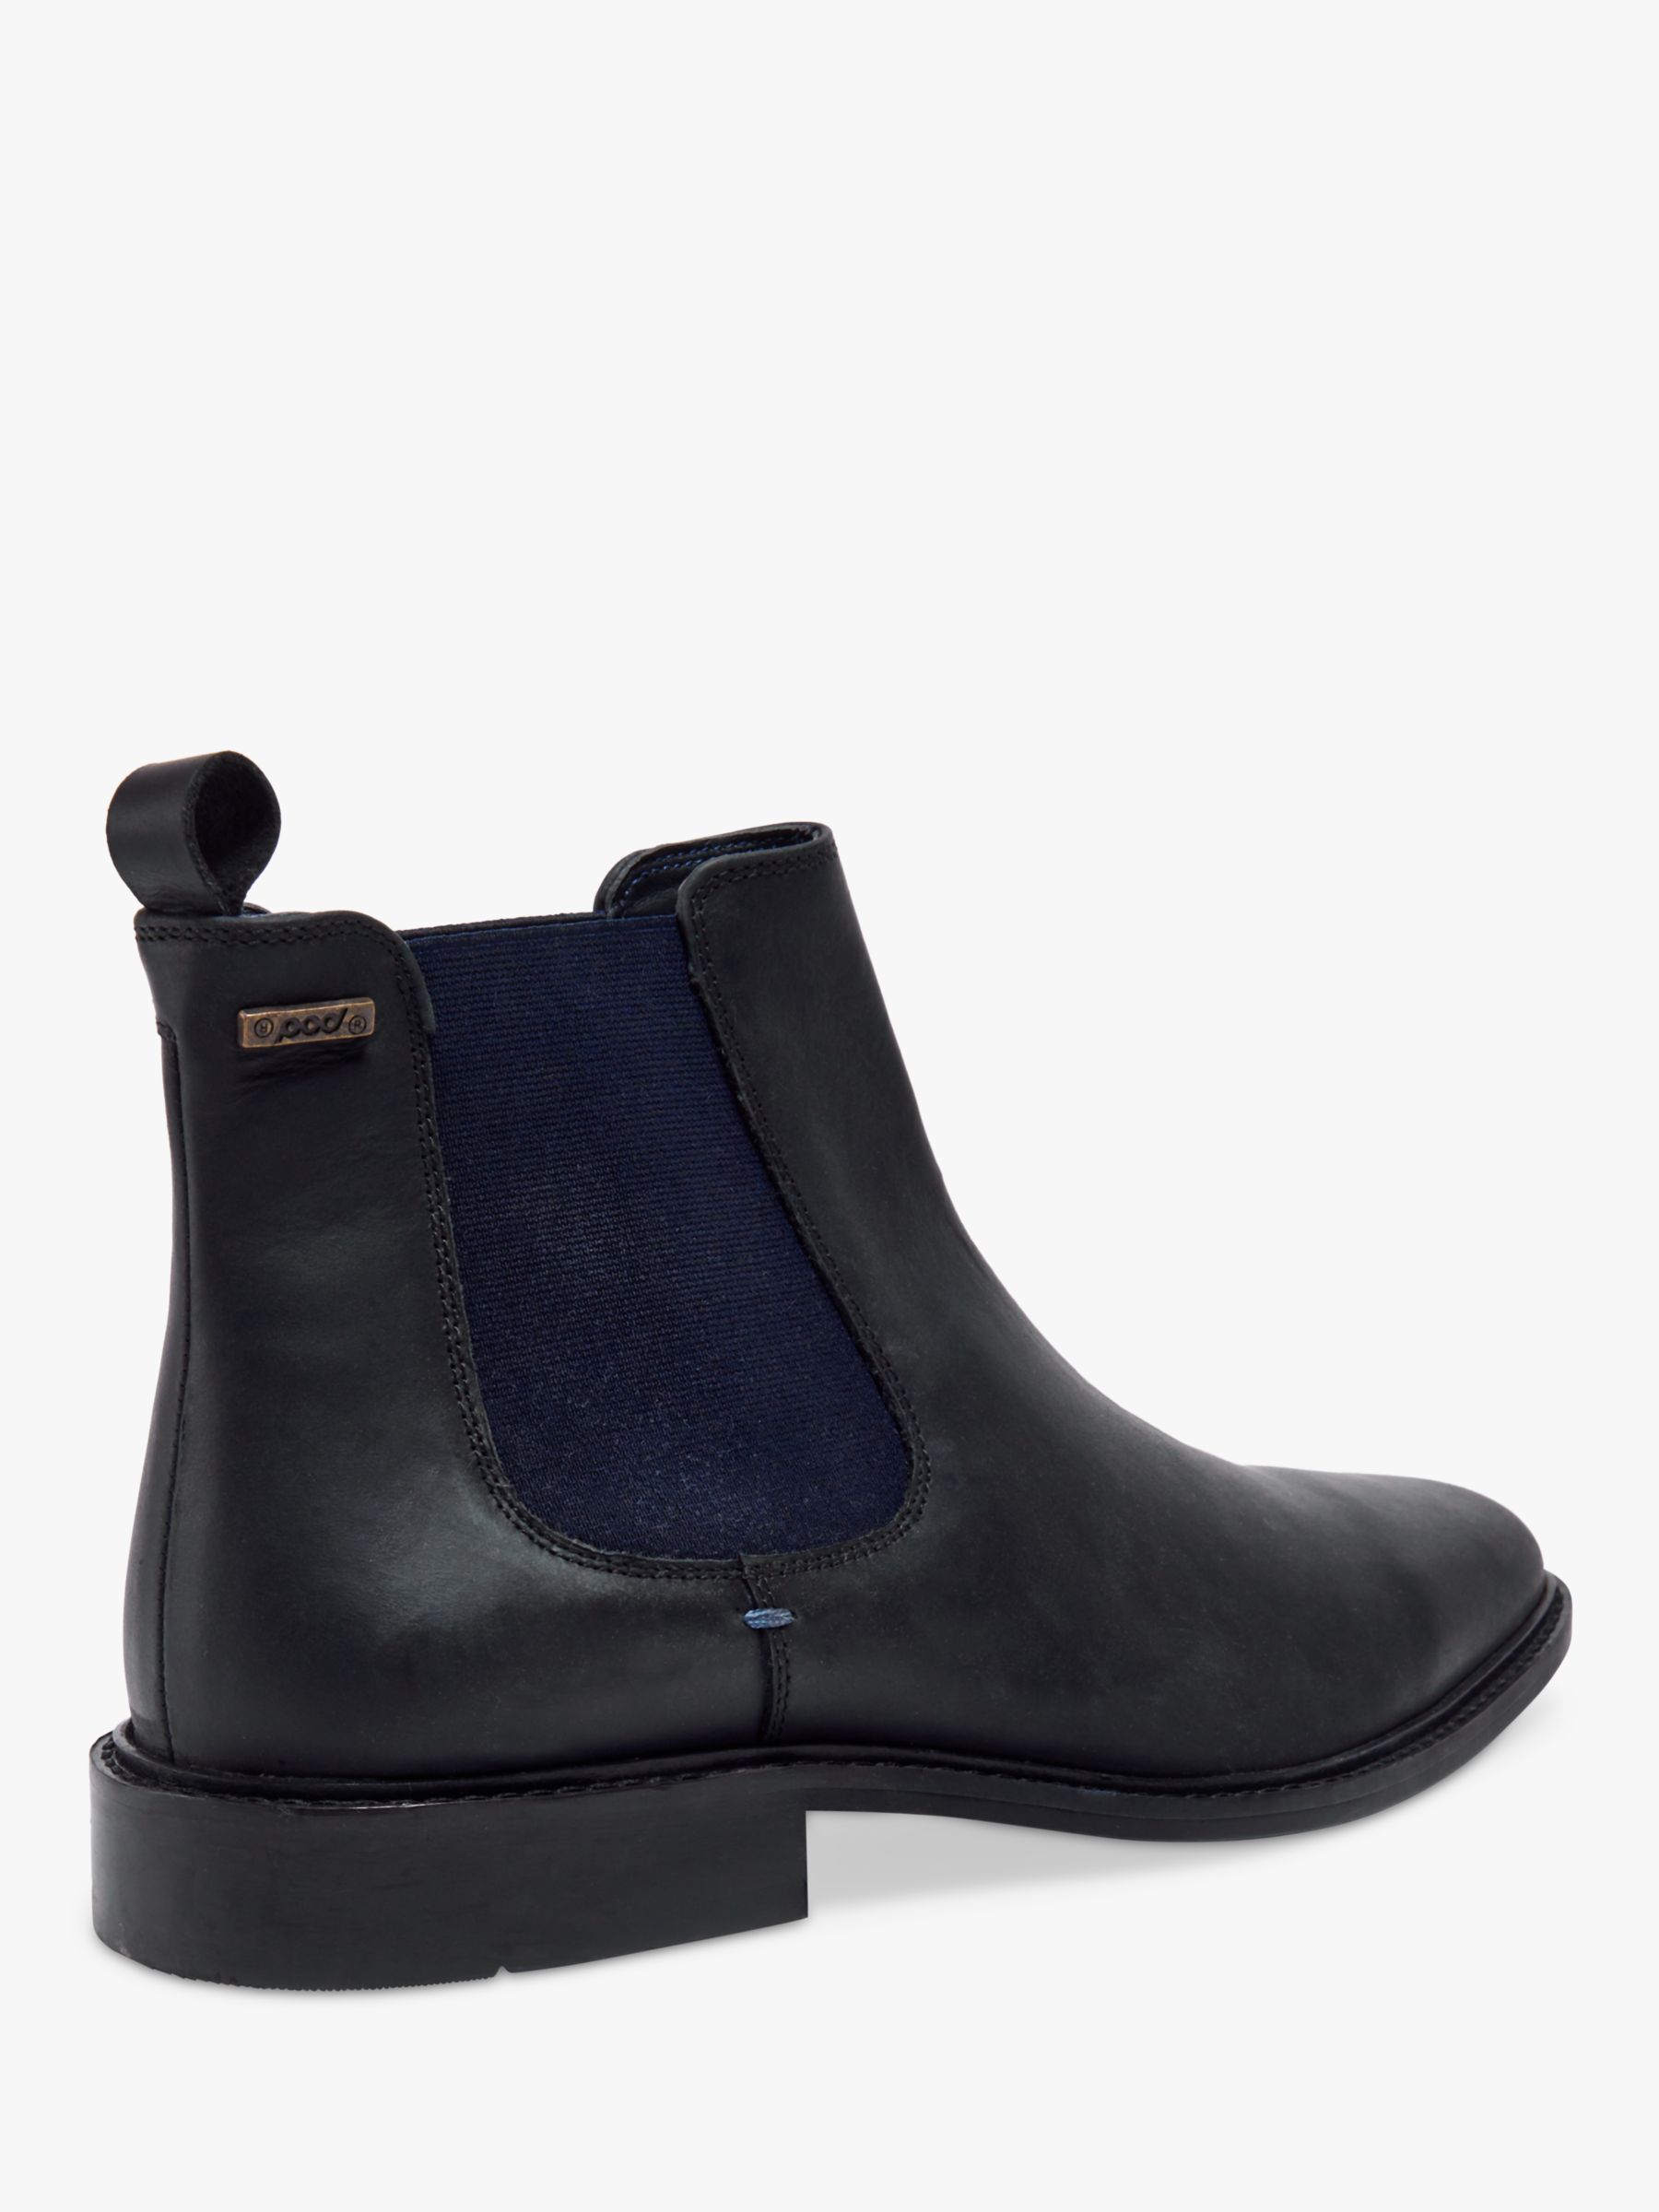 Buy Pod Birch Leather Waxy Chelsea Boots, Black Online at johnlewis.com